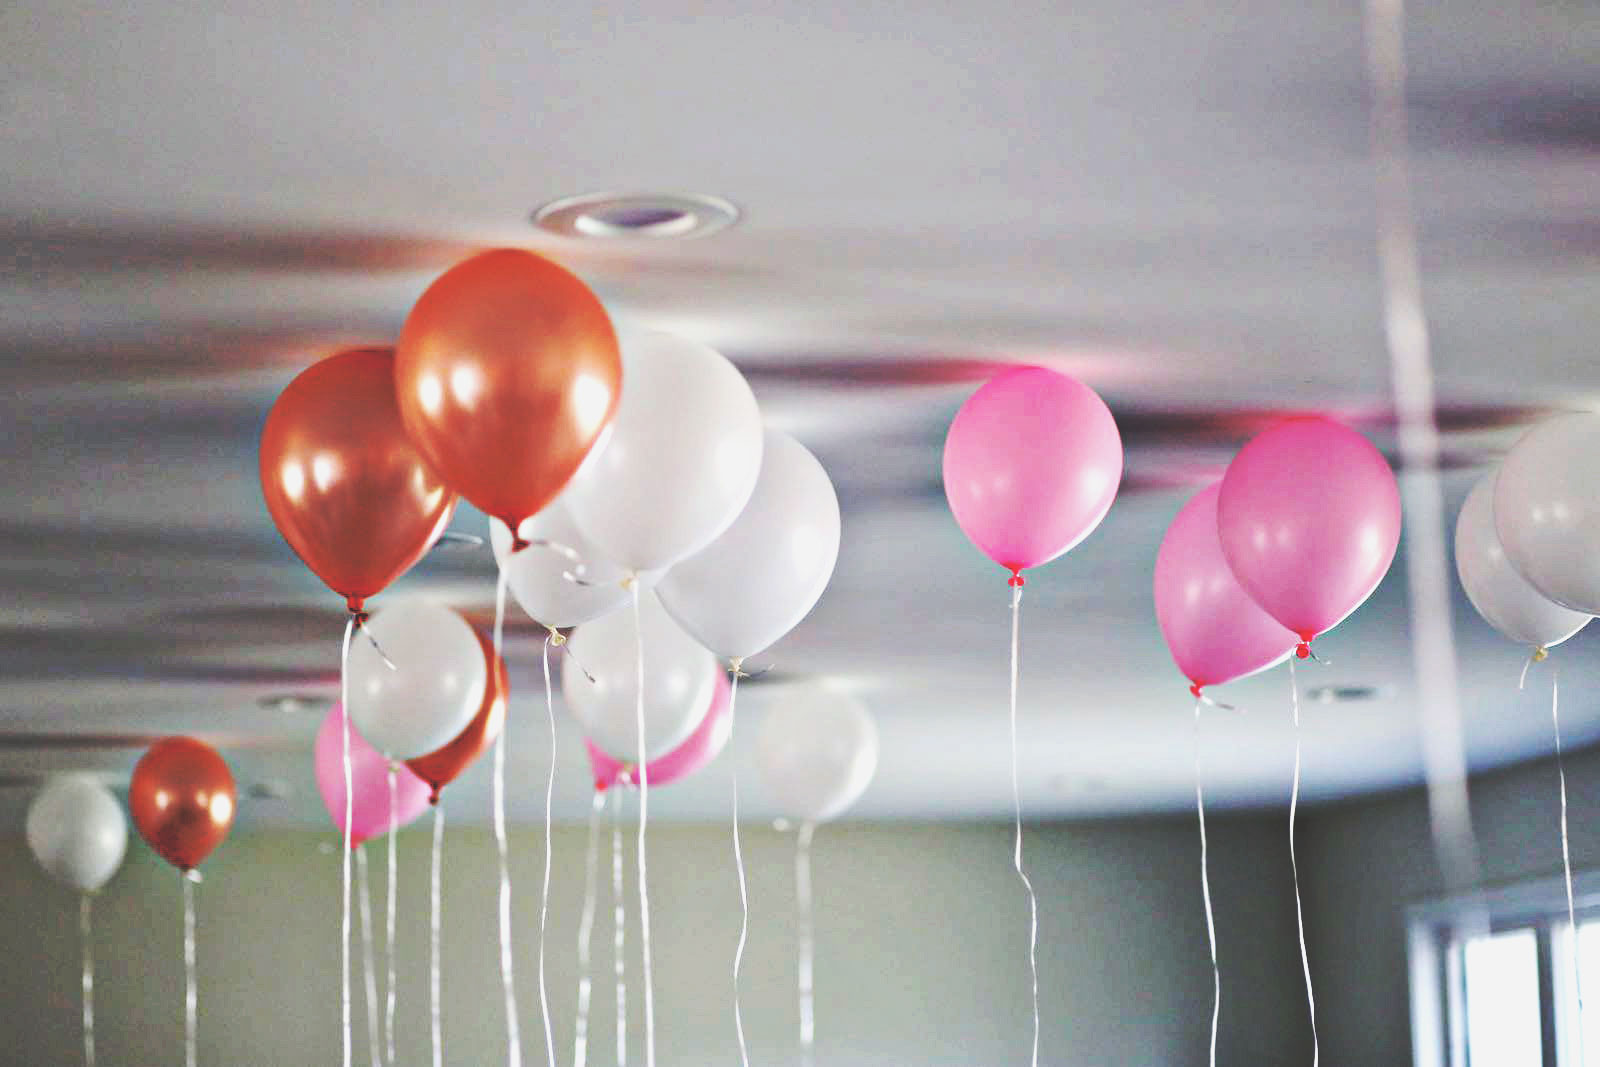 Everything you need to throw a Unicorn Theme girl's first birthday party!